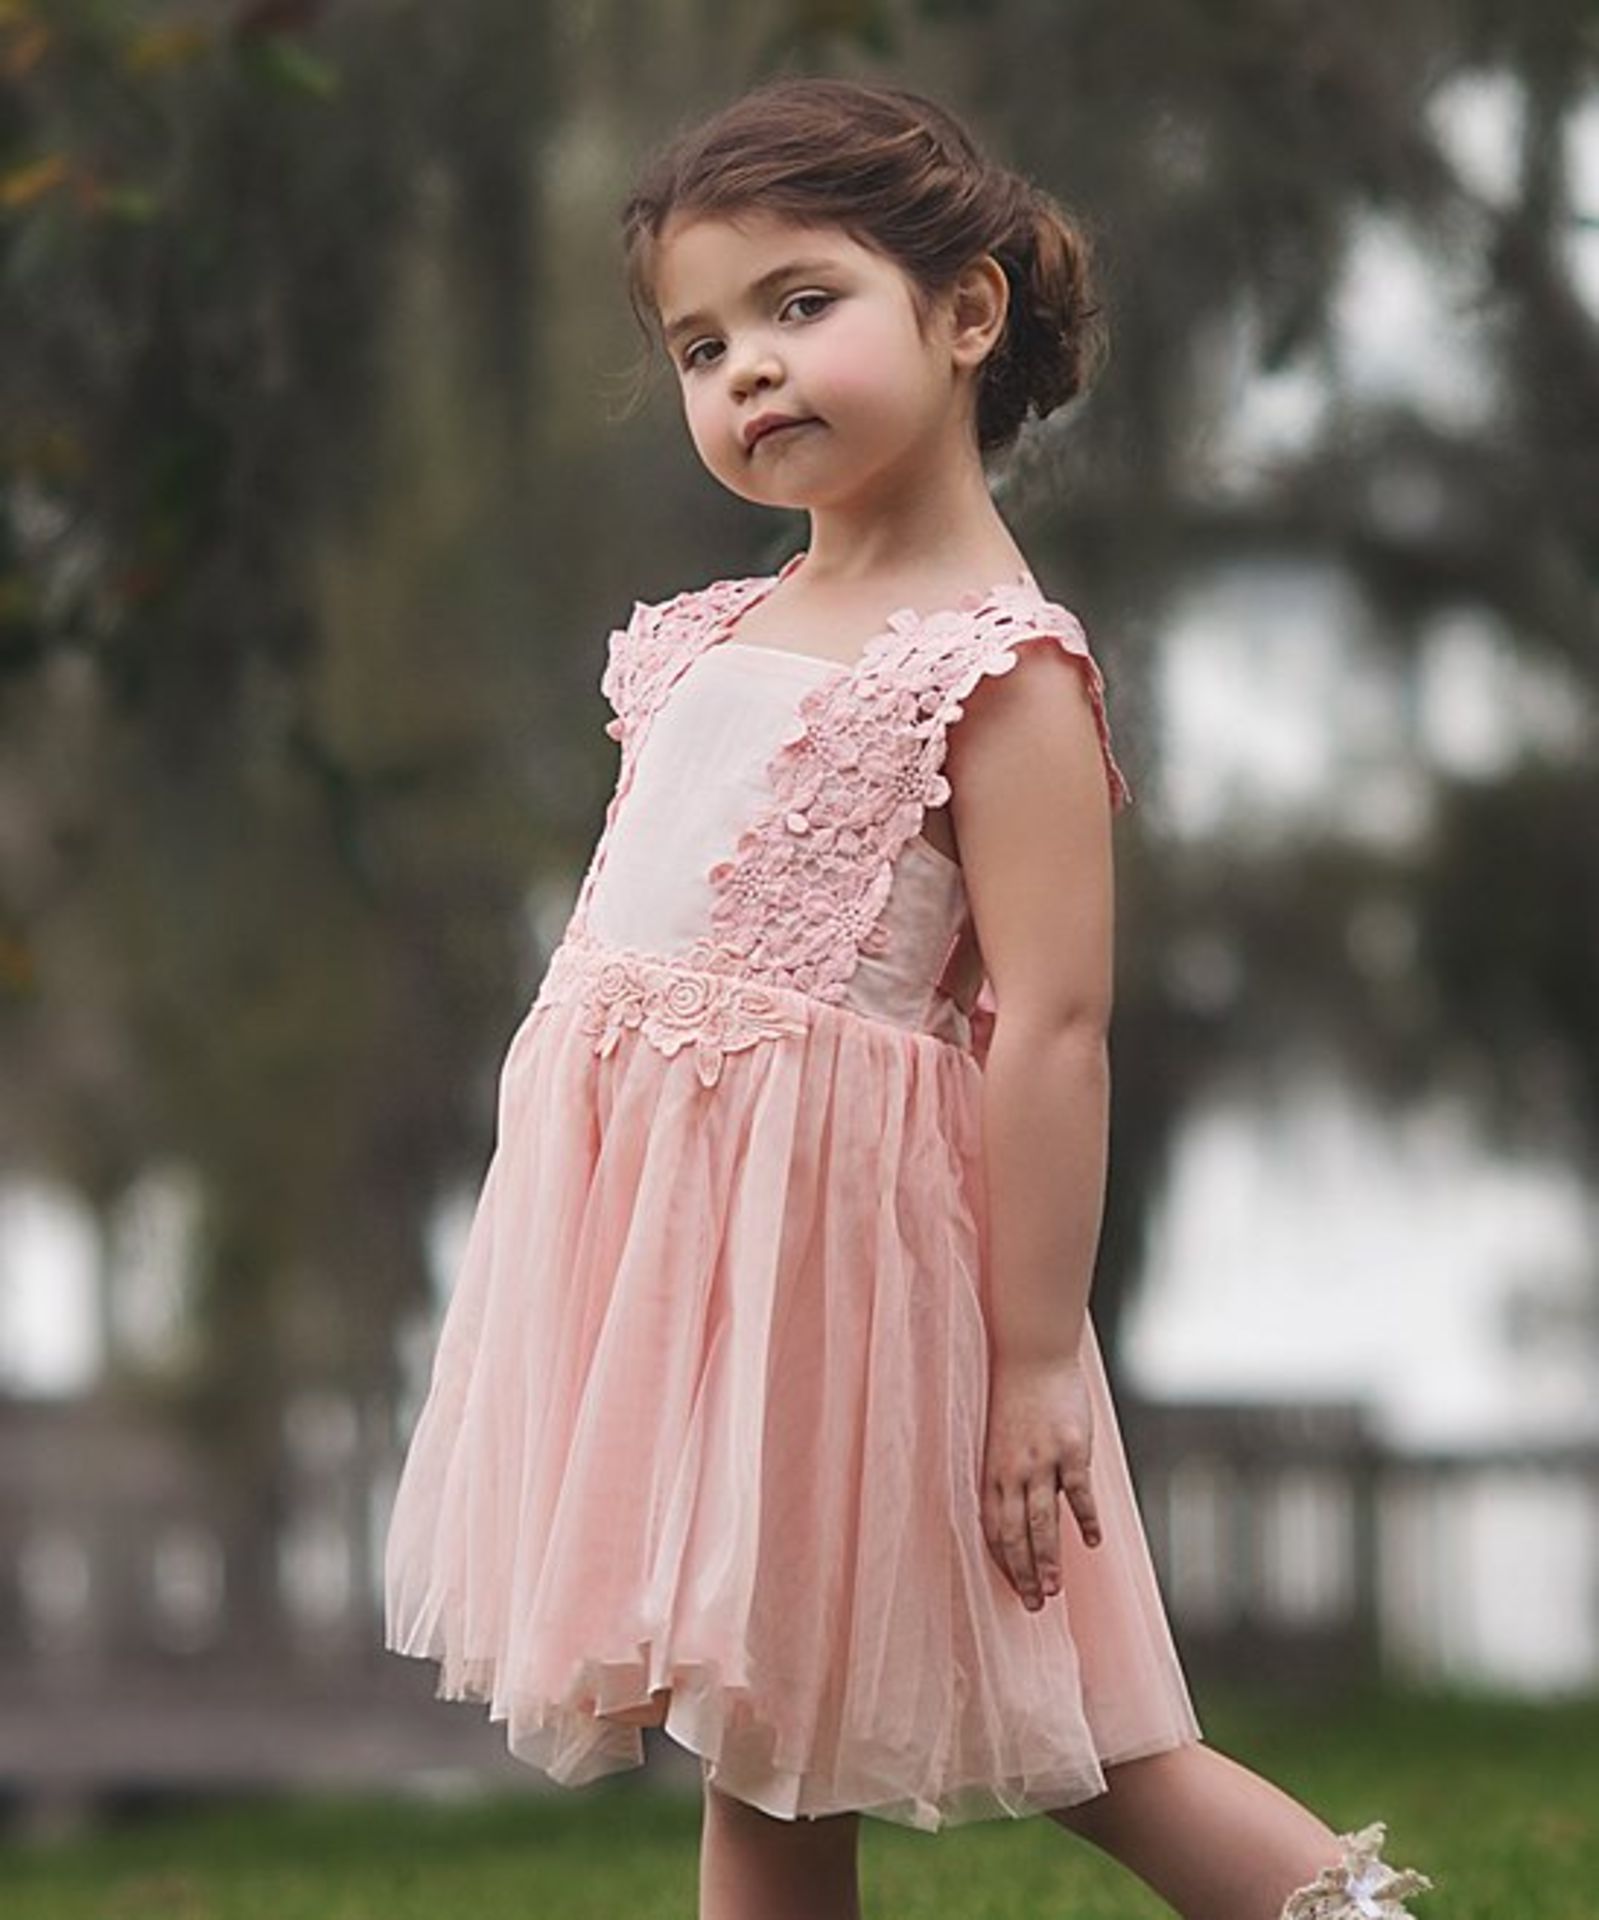 Blush Lace Accent A-Line Dress - Infant, Toddler & Girls - Image 2 of 3